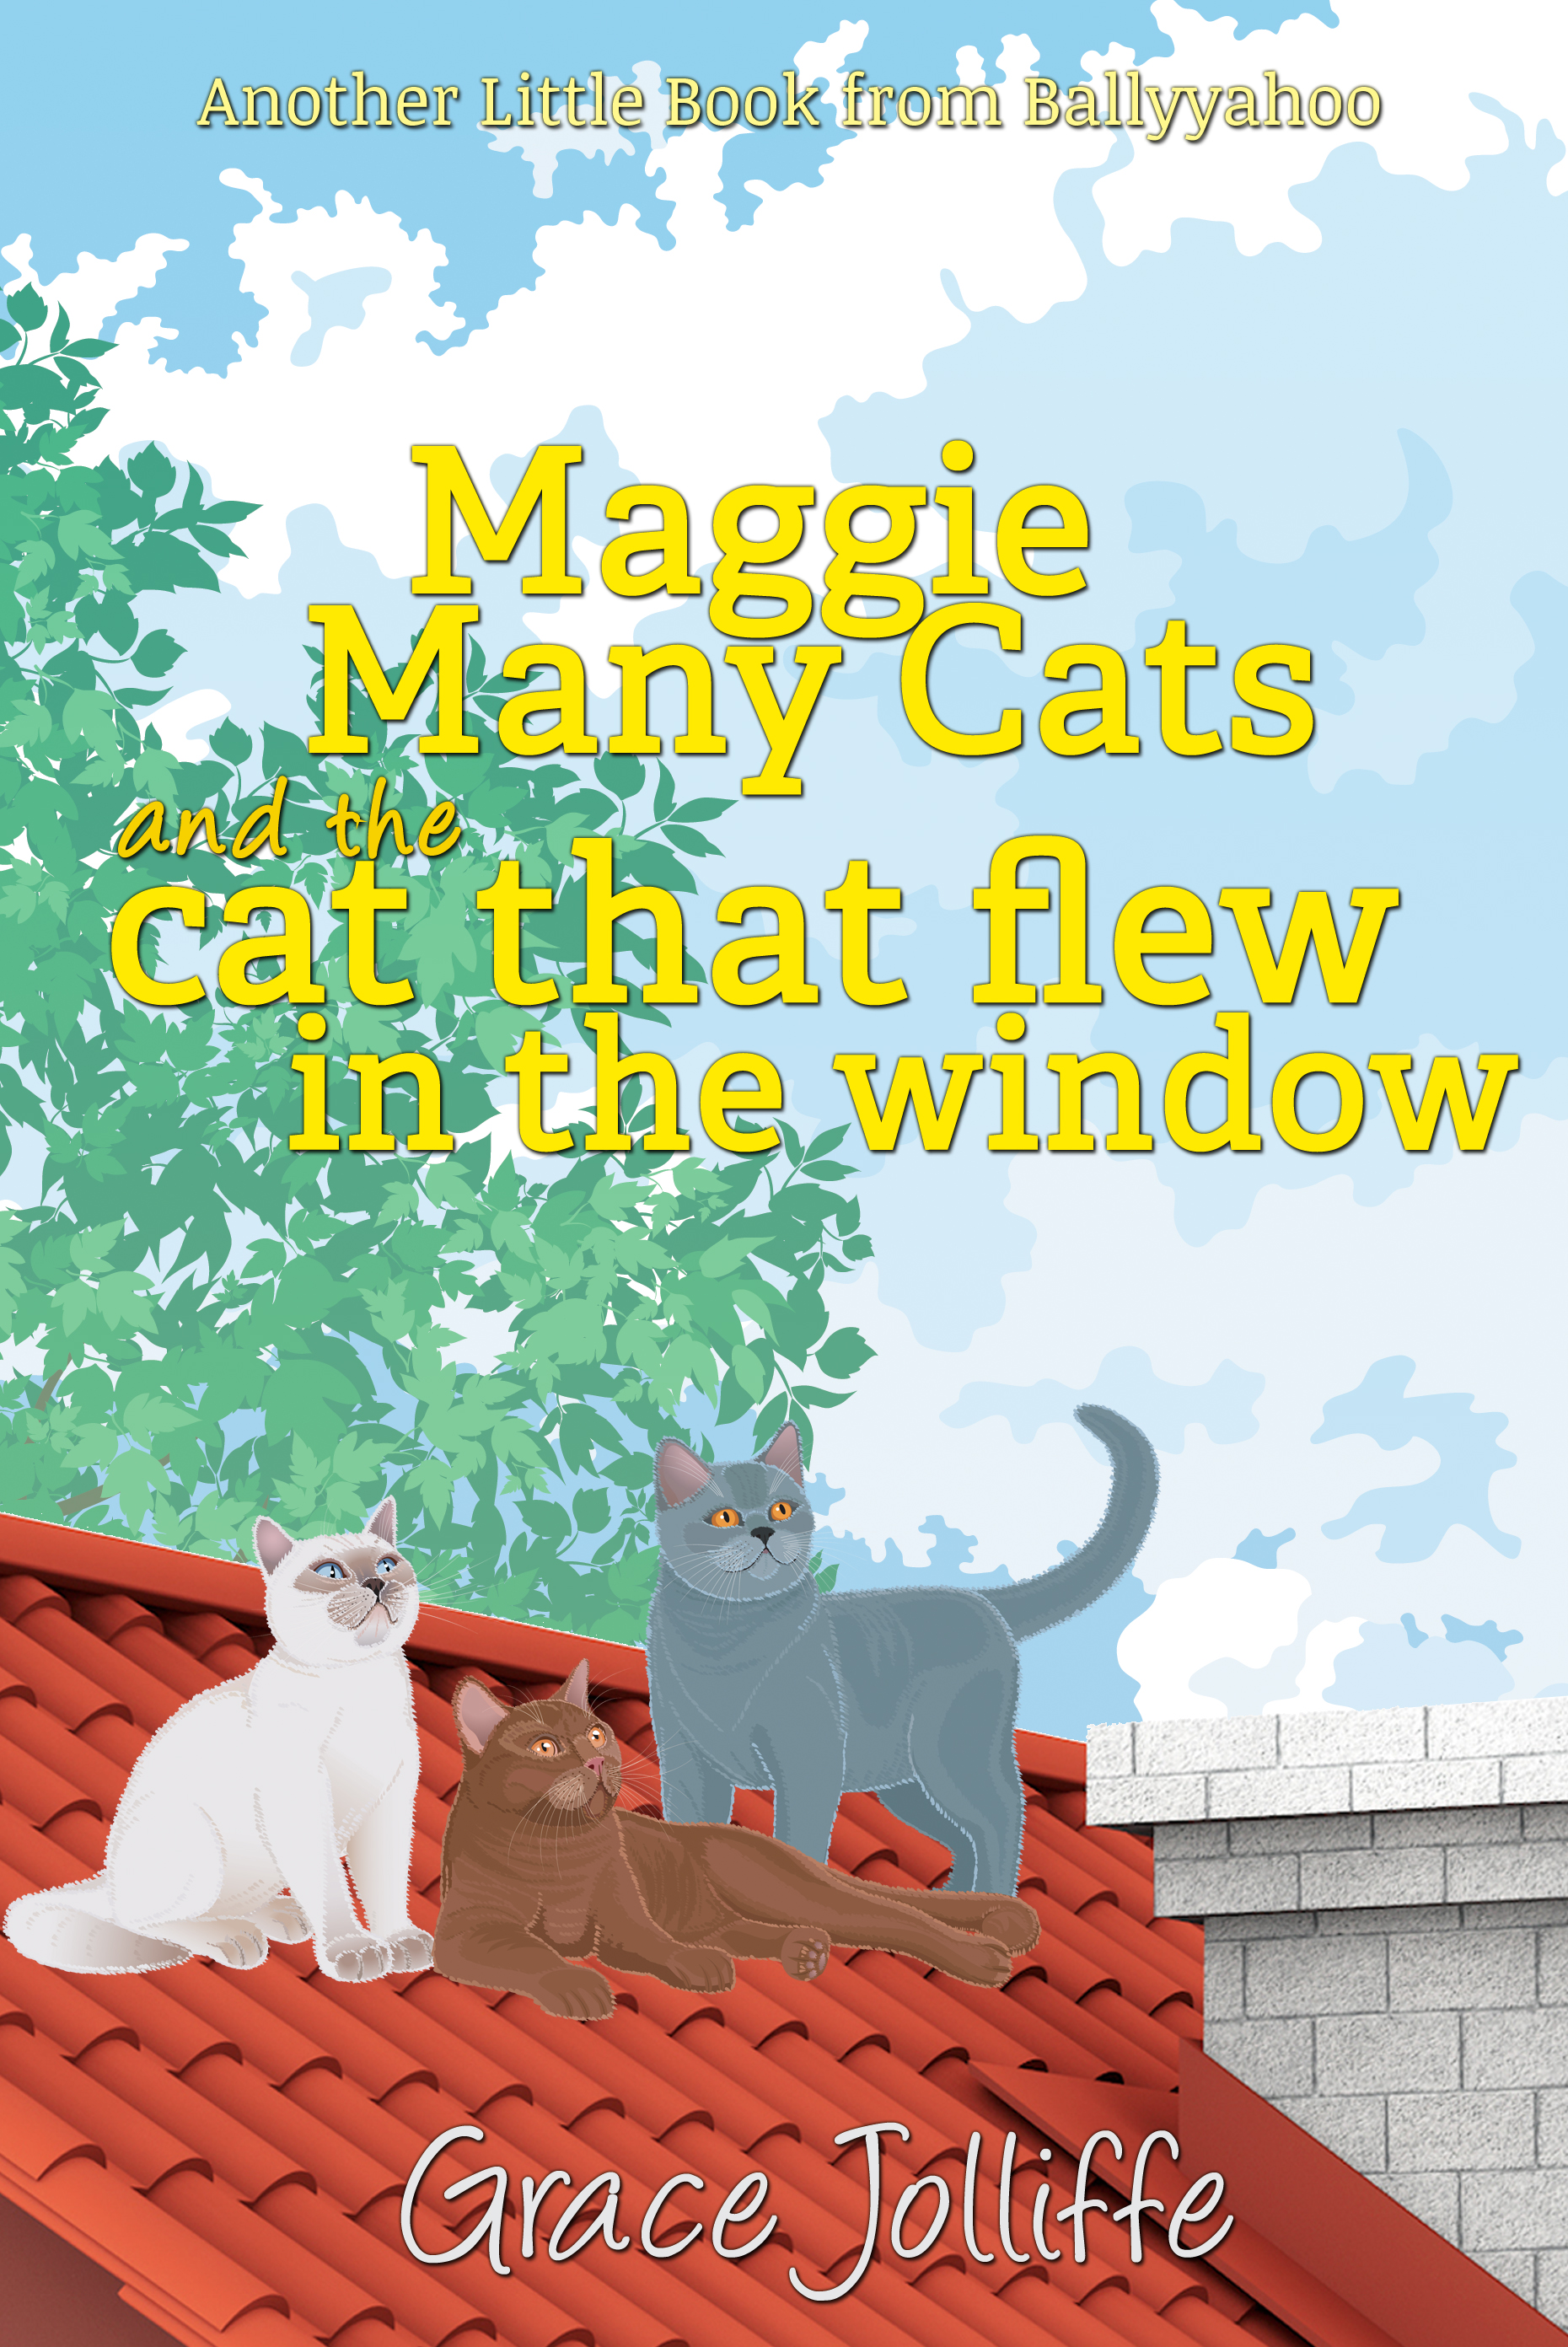 book cover of Maggie Many Cats illustrating a story about baby kittens